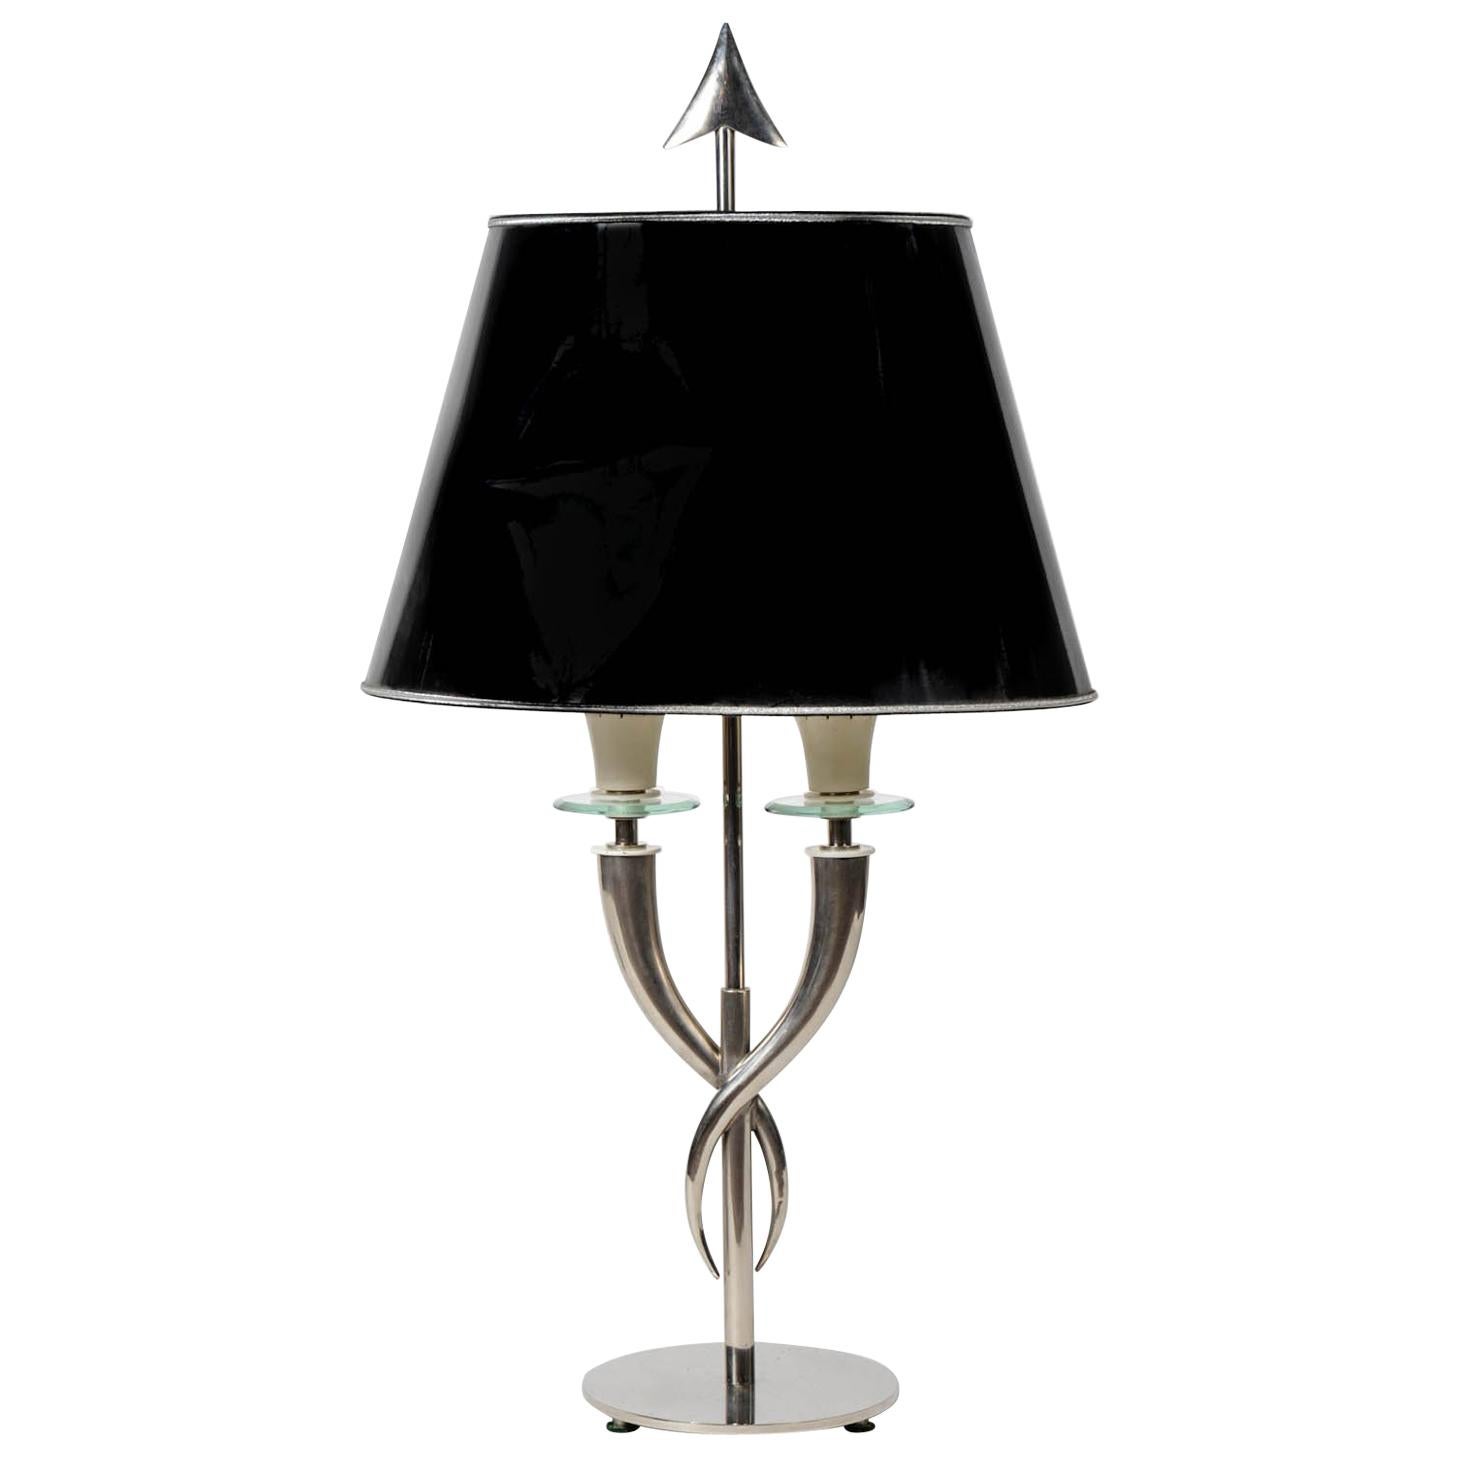 Pair of Lamps Attributed to Gio Ponti